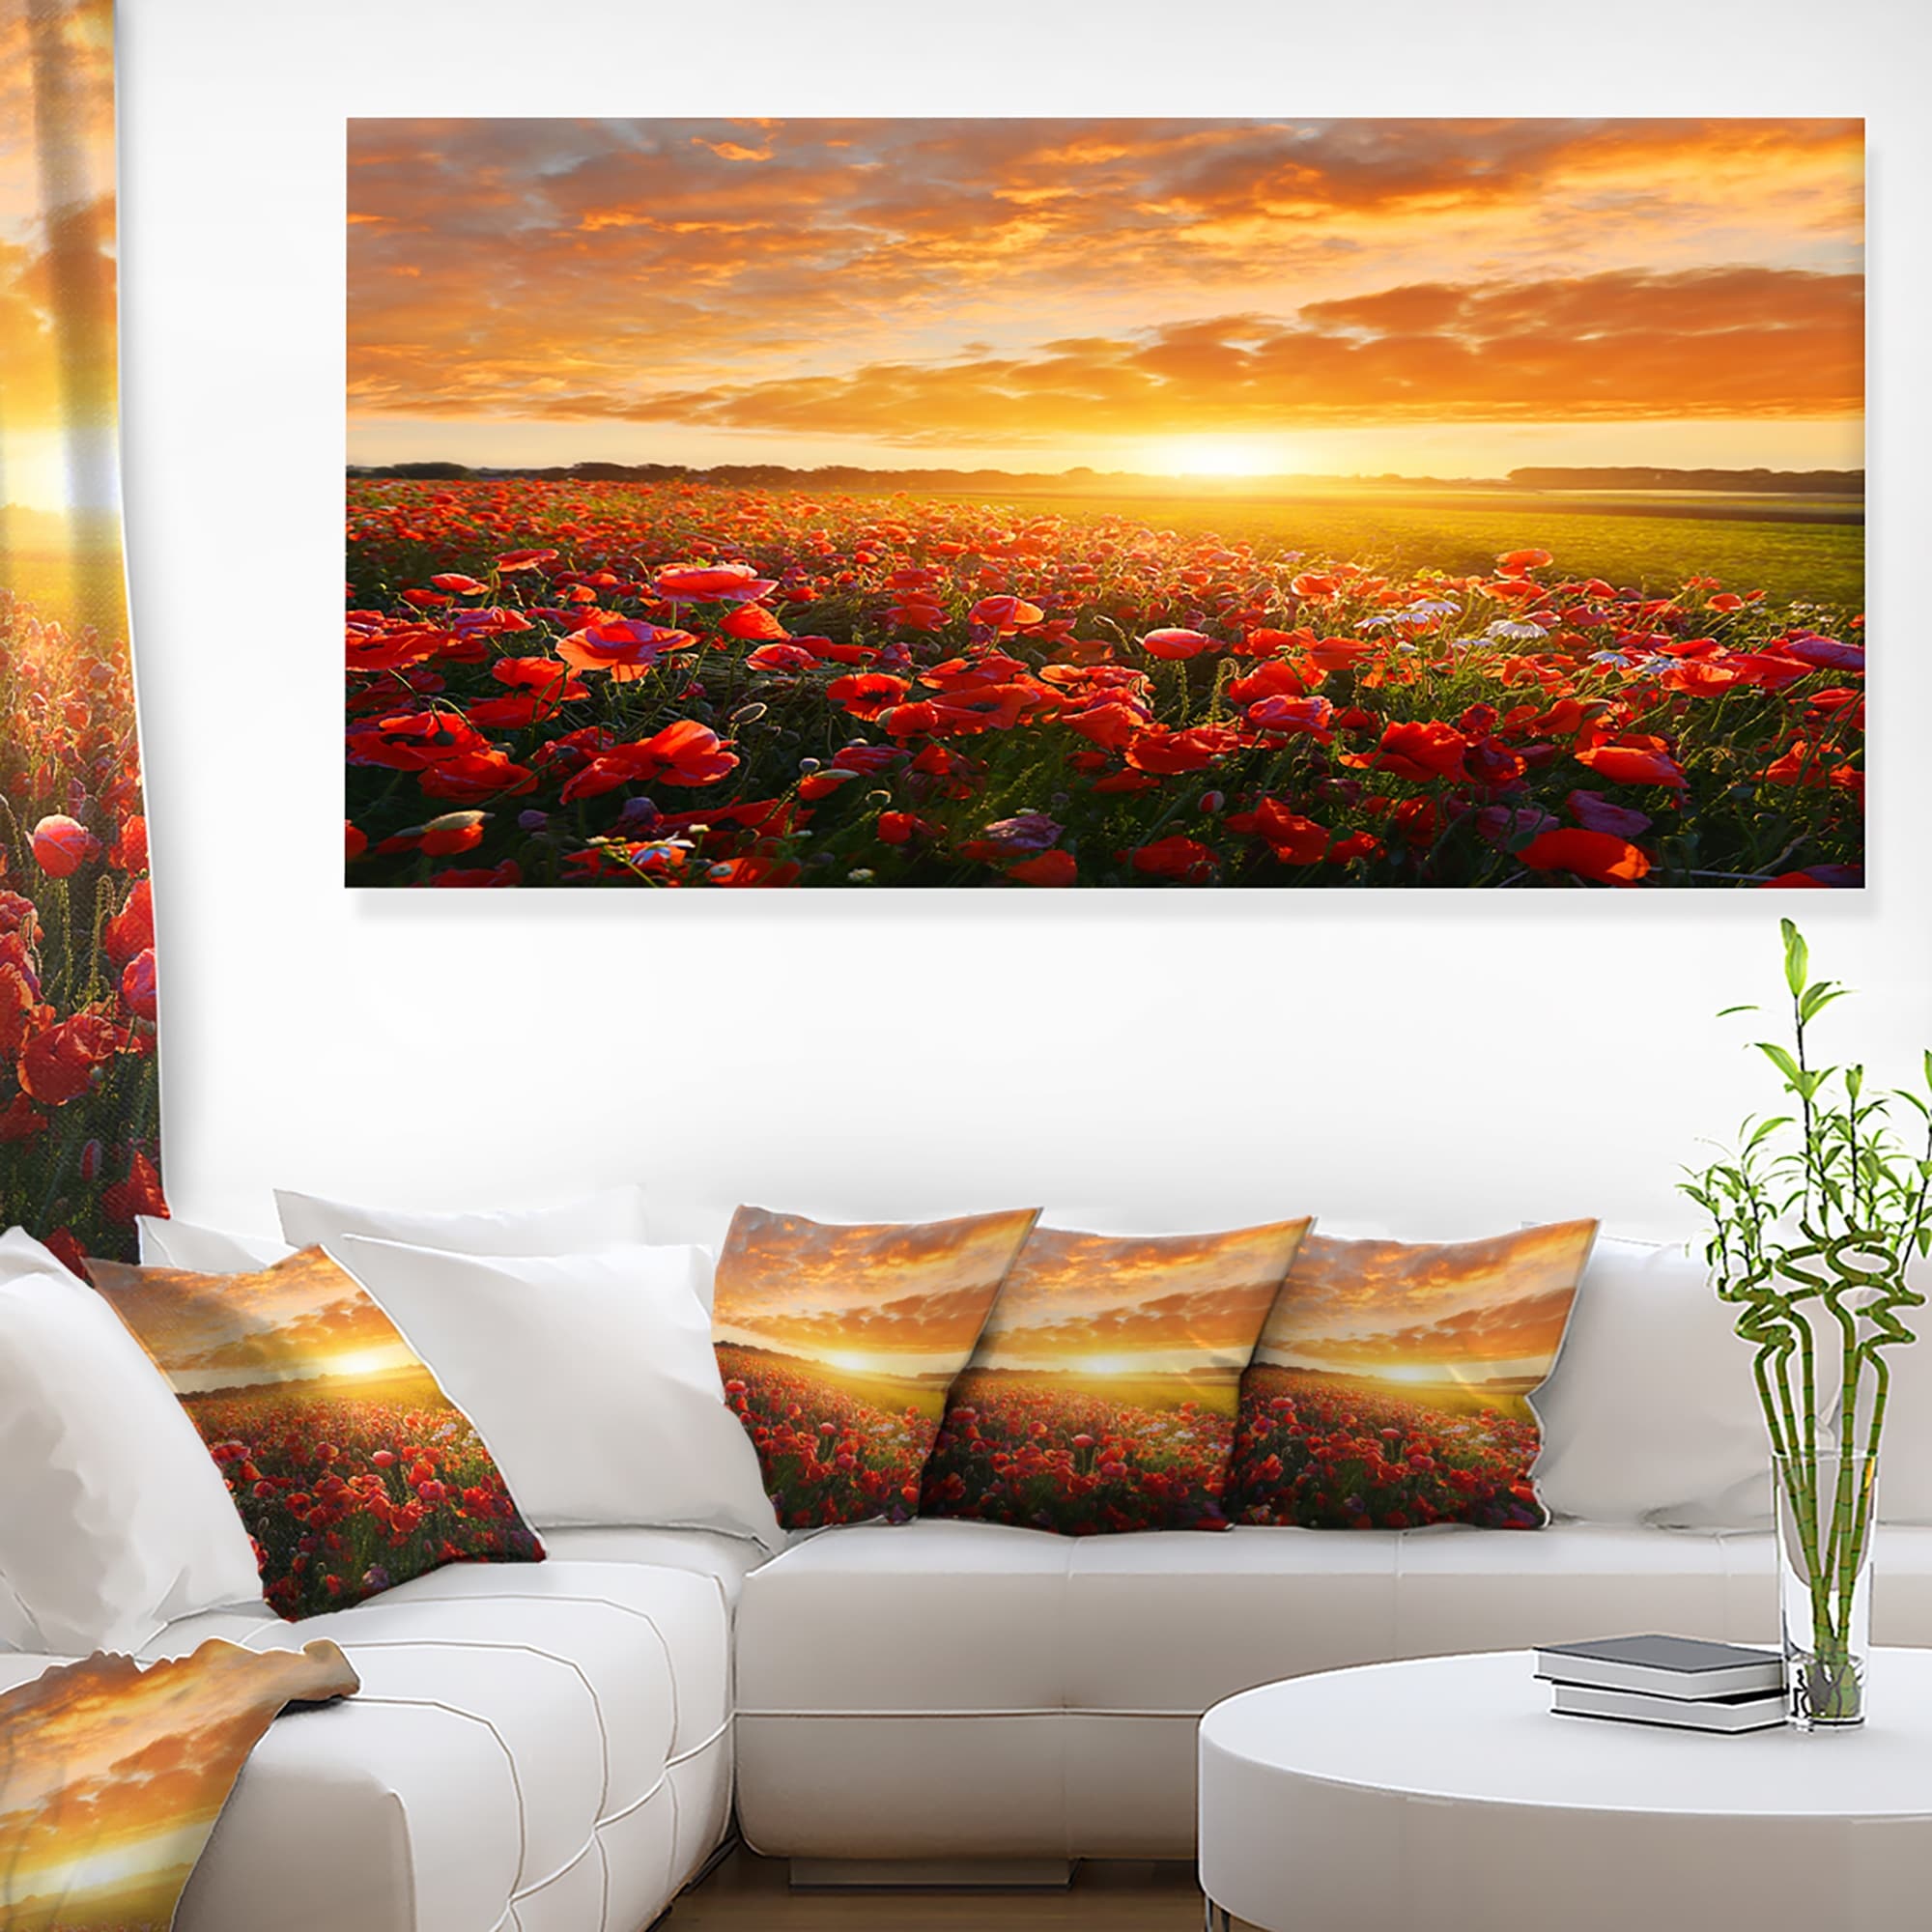 https://ak1.ostkcdn.com/images/products/is/images/direct/63dbf69eb5c8604401a39afdaed66a1cf68e177f/Designart-%27Beautiful-Poppy-Field-at-Sunset%27-Abstract-Wall-Art-Canvas.jpg